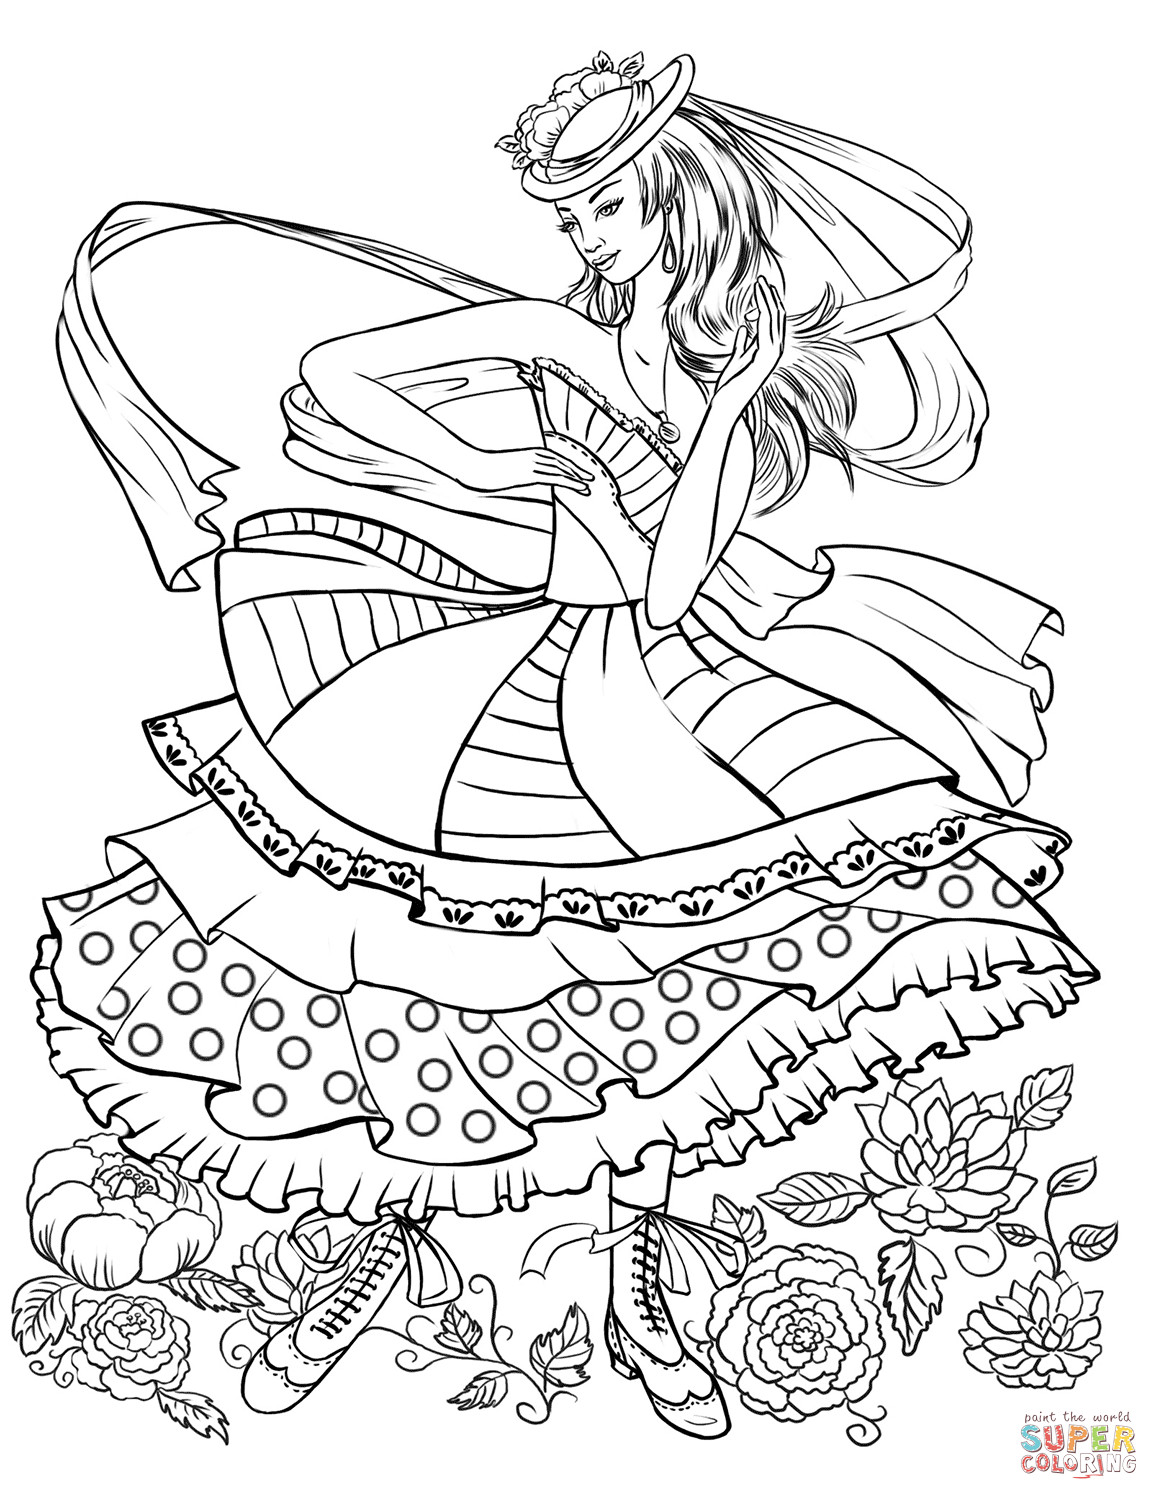 Girls Dancing Coloring Pages
 Girl Dancing in a Vintage Fashion Clothing coloring page